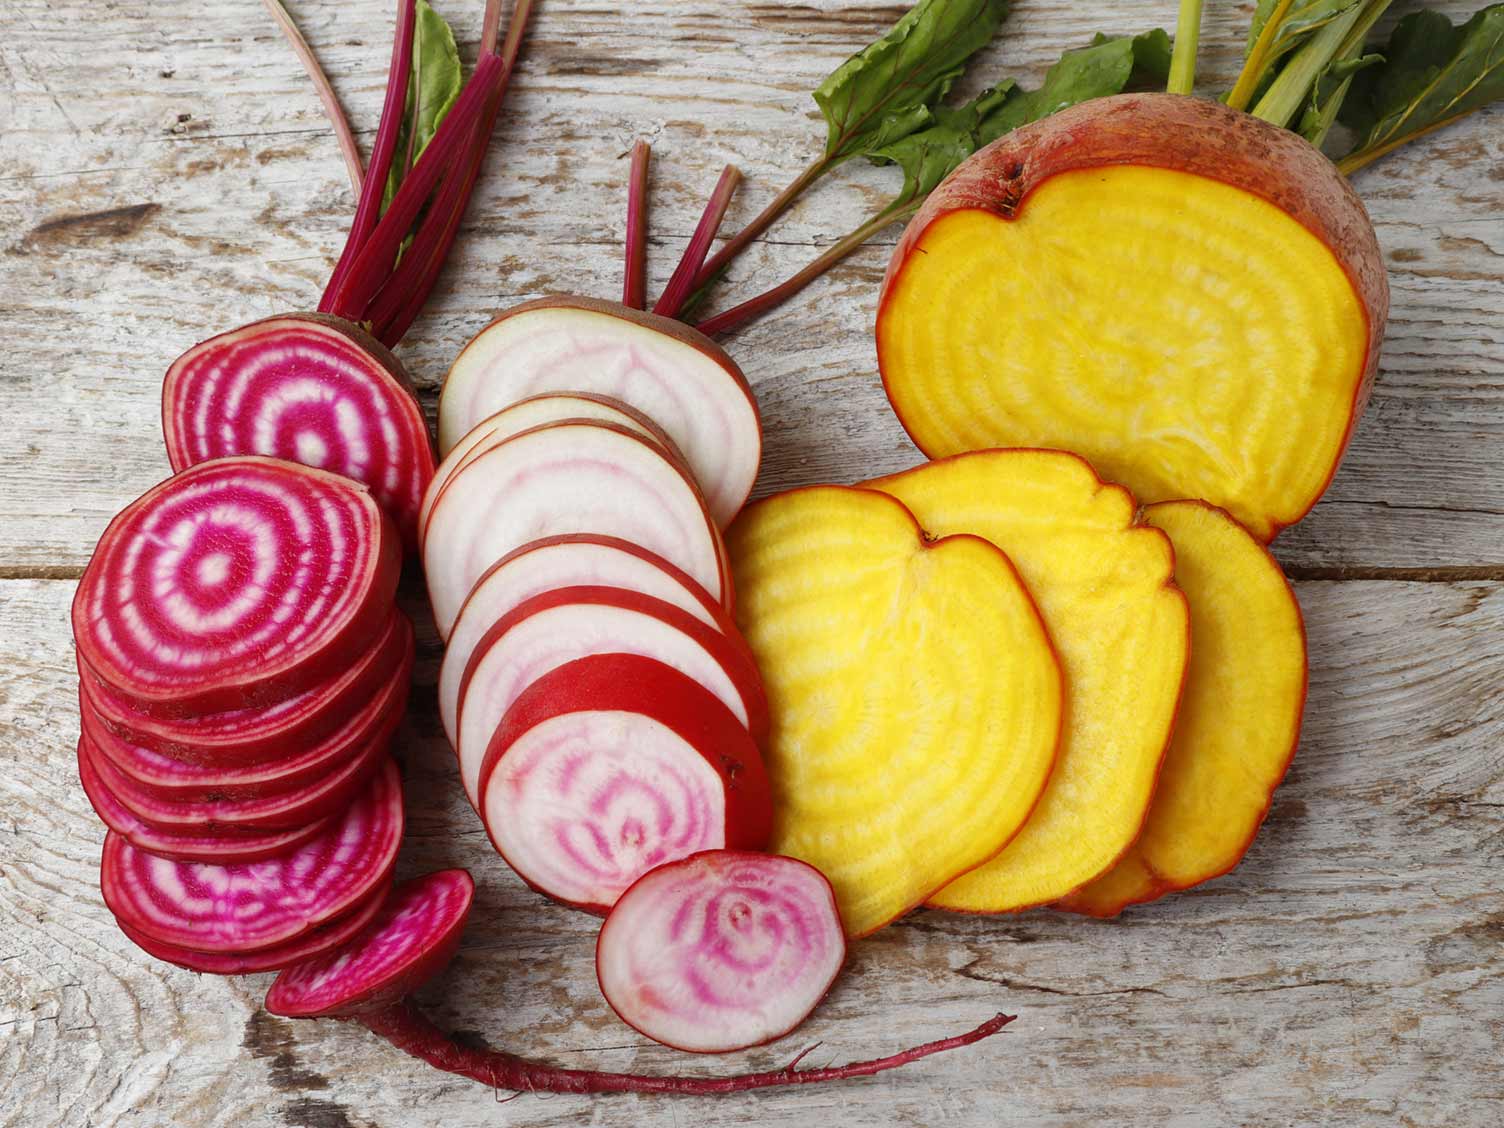 Colourful beets